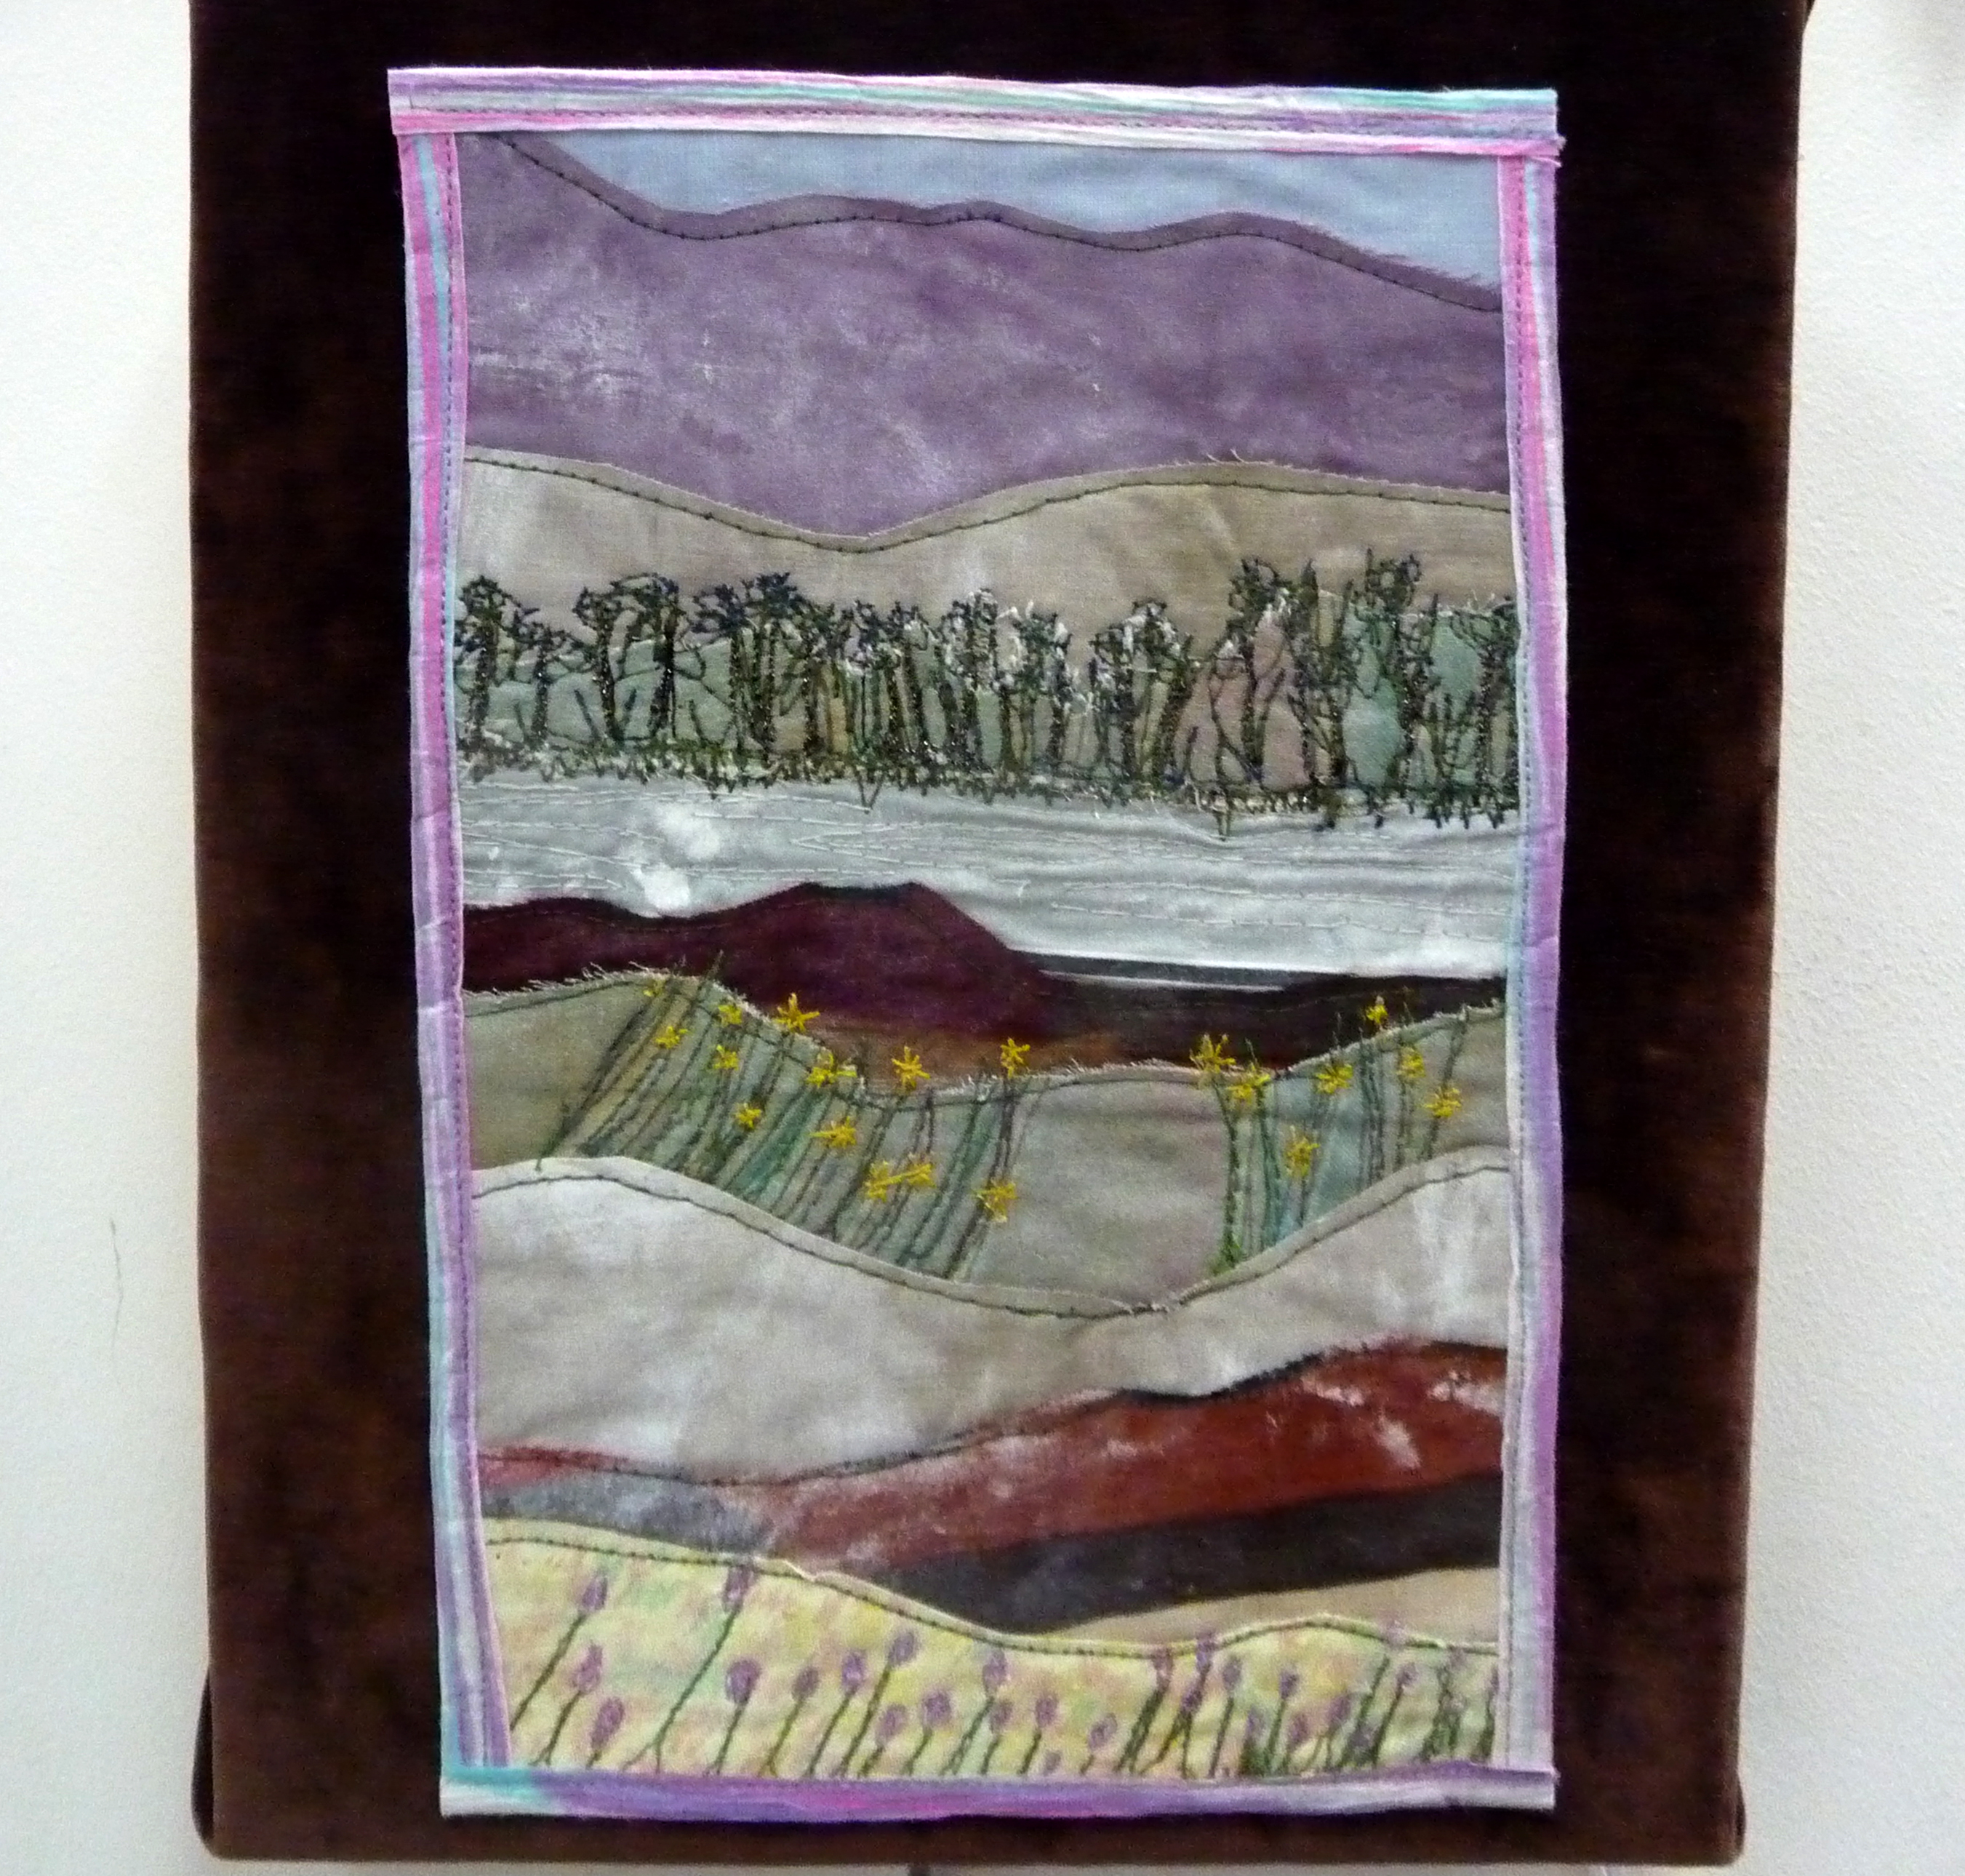 MEMORIES OF IONA by Sue Tyndesley, fabric and stitch hanging